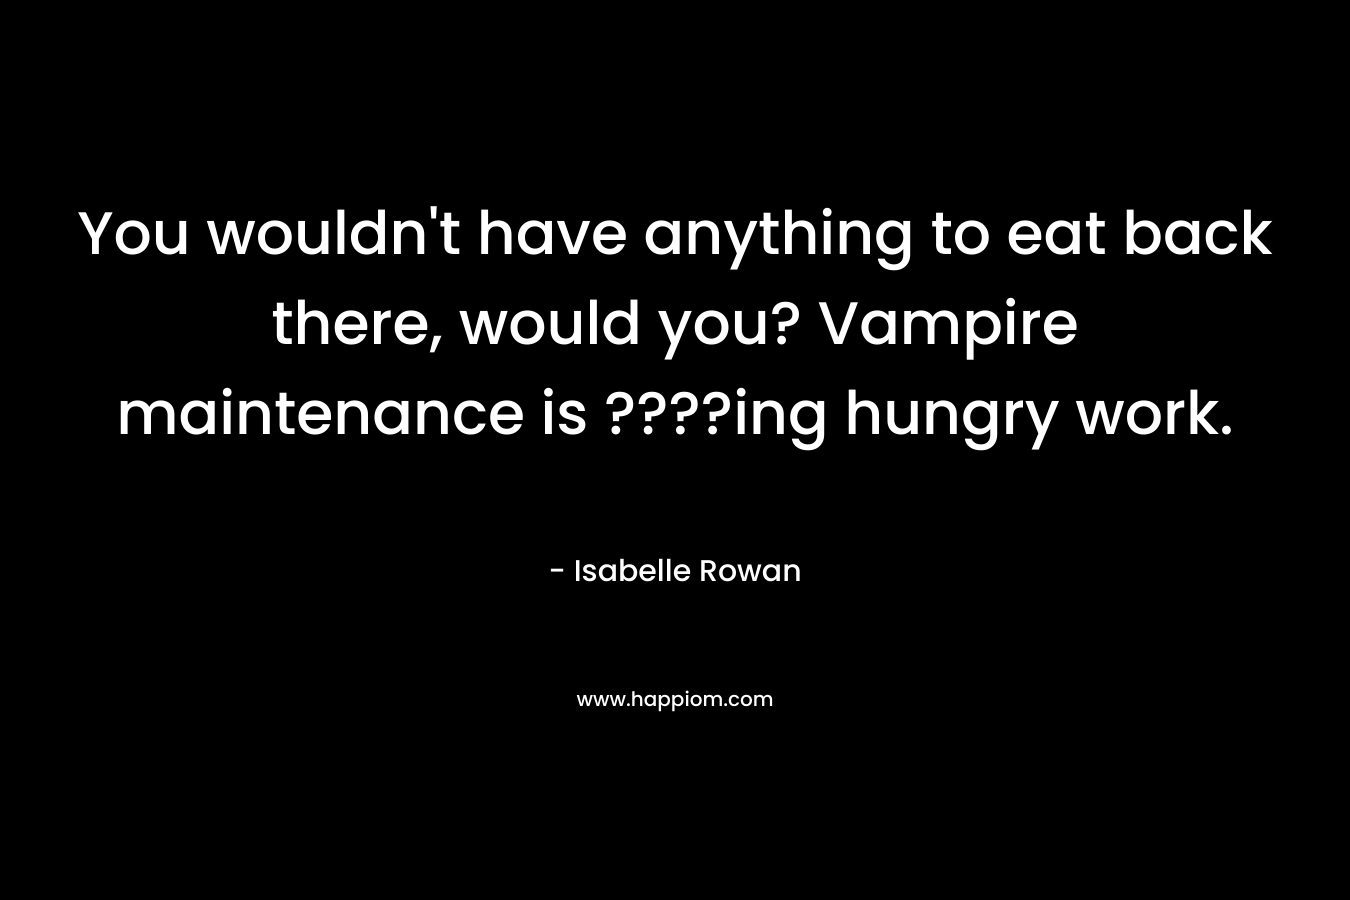 You wouldn't have anything to eat back there, would you? Vampire maintenance is ????ing hungry work.